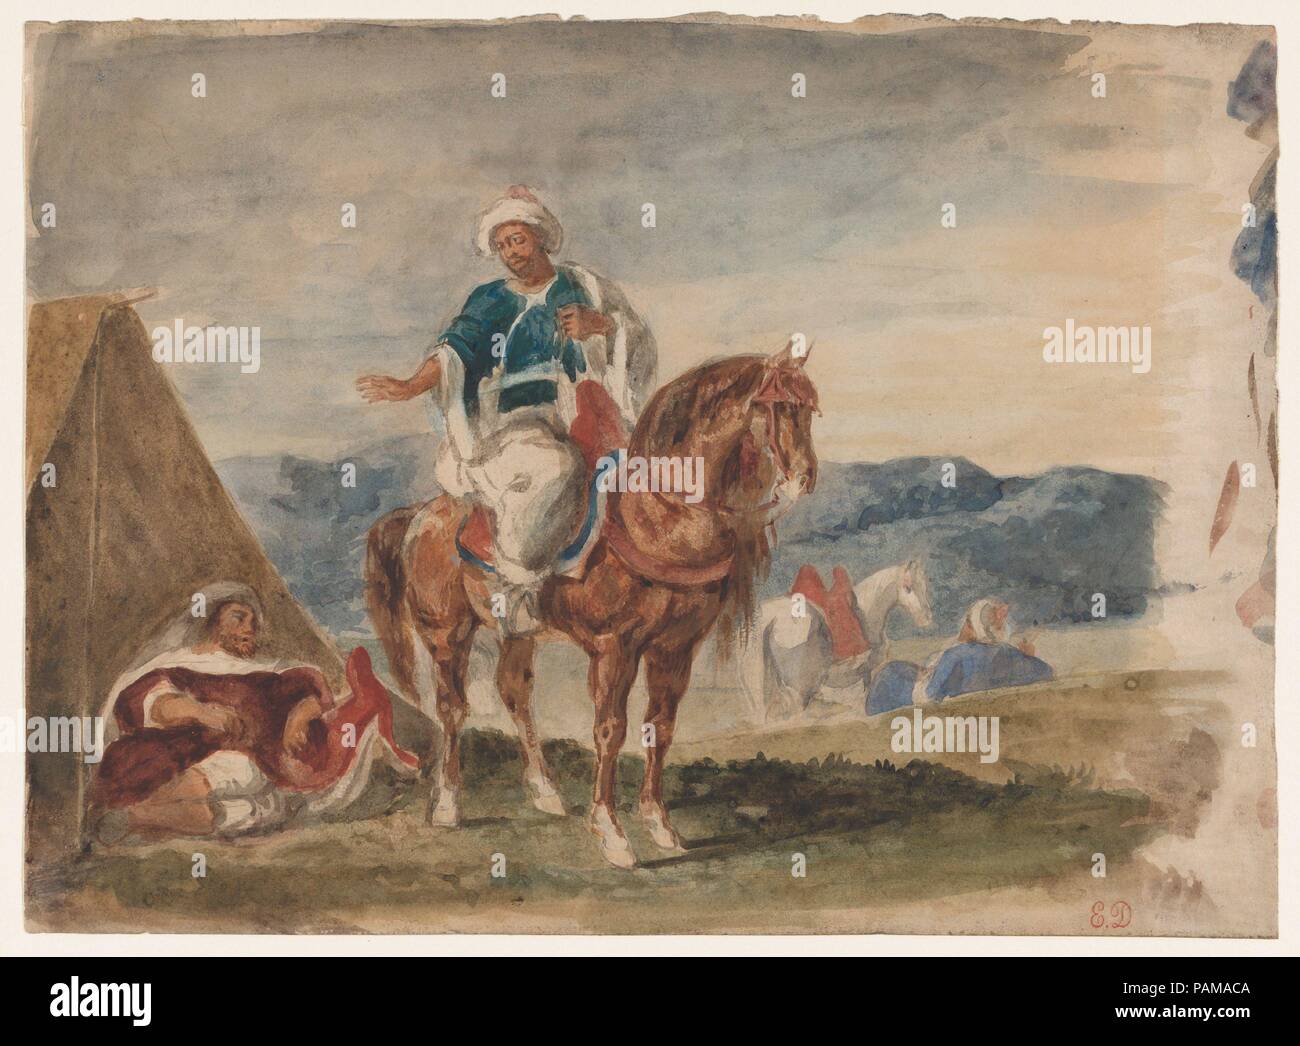 Three Arab Horsemen at an Encampment. Artist: Eugène Delacroix (French, Charenton-Saint-Maurice 1798-1863 Paris). Dimensions: Overall: 8 9/16 x 11 5/8 in. (21.7 x 29.6 cm). Date: ca. 1832.  Delacroix's journey to North Africa in 1832 had a profound and lasting influence on his art, affecting the content and color of virtually all his subsequent work. This drawing was likely made during his travels between Tangier and Meknes, when he sketched extensively. The three men, probably Moroccan horsemen, accompanied the French diplomatic group at an encampment. Delacroix clearly reveled in the vivid c Stock Photo